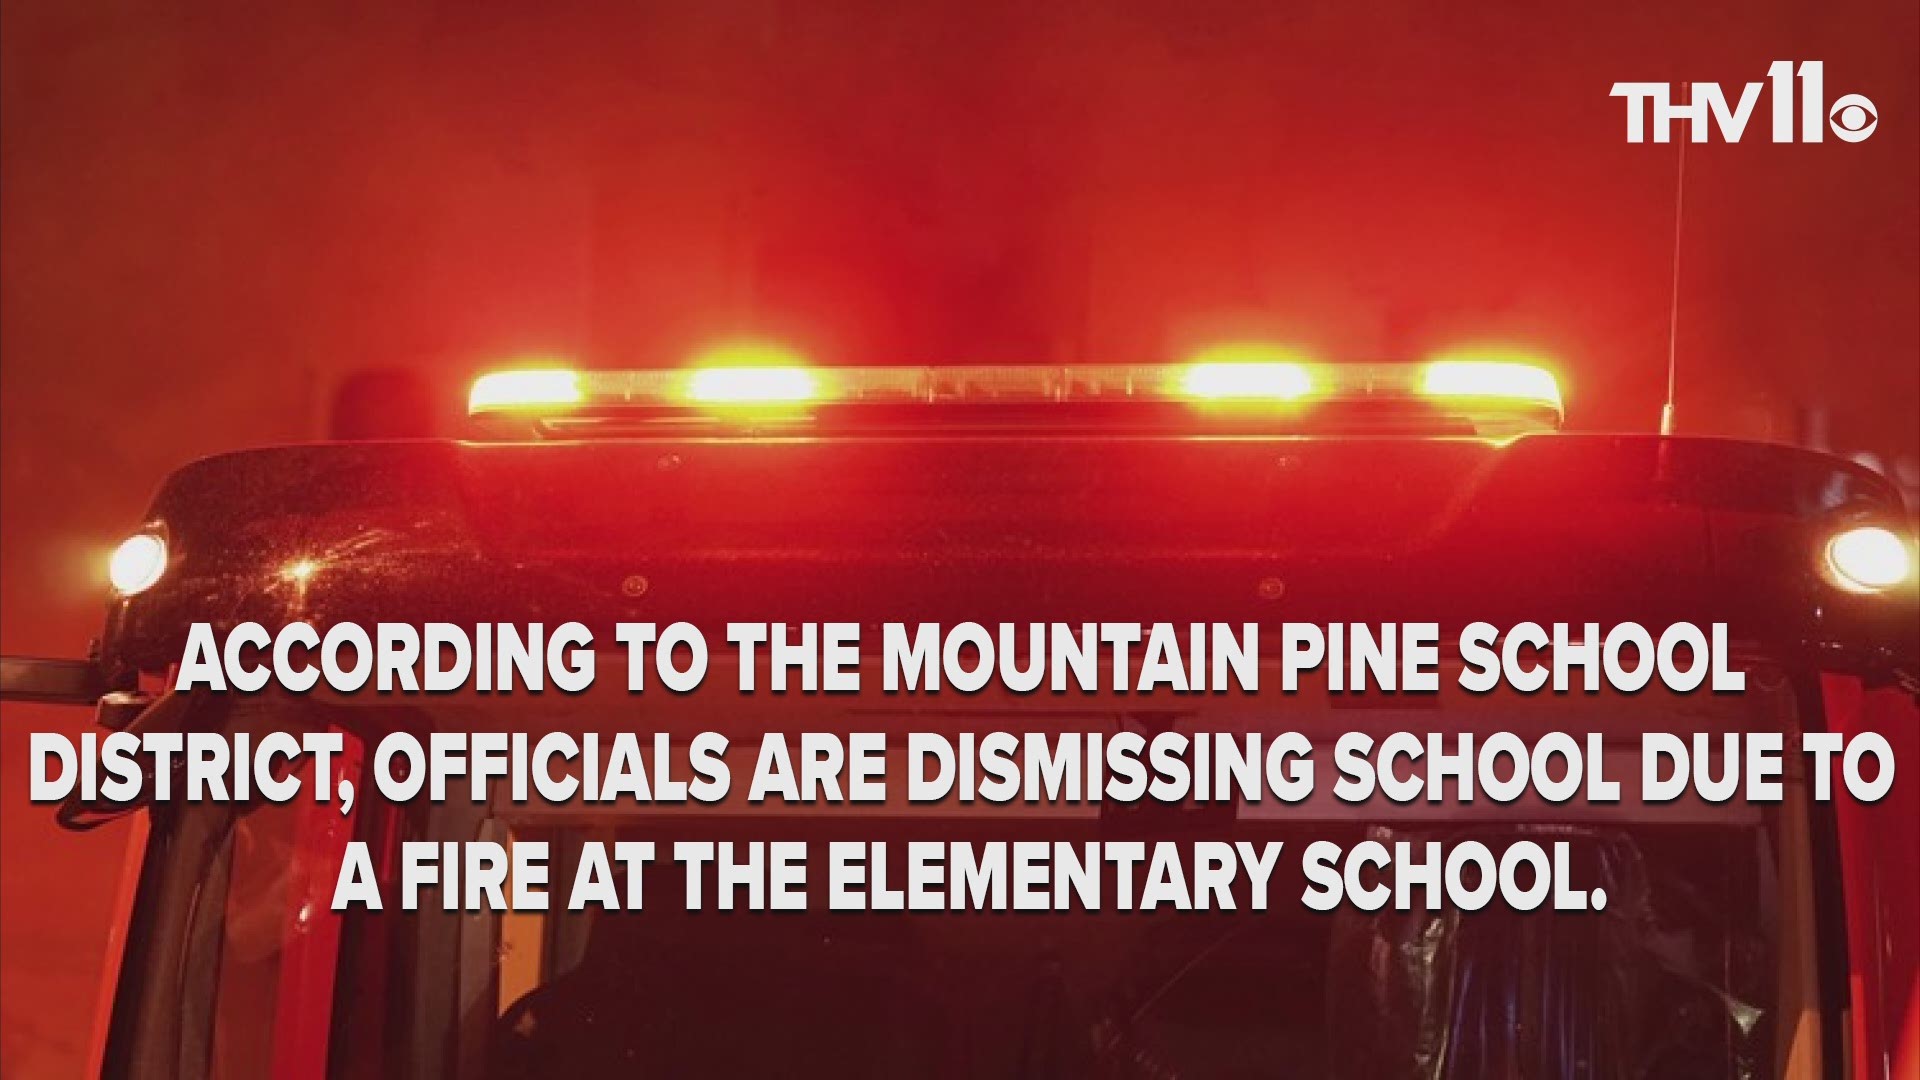 Officials say before students arrived, a fire broke out at the elementary school.